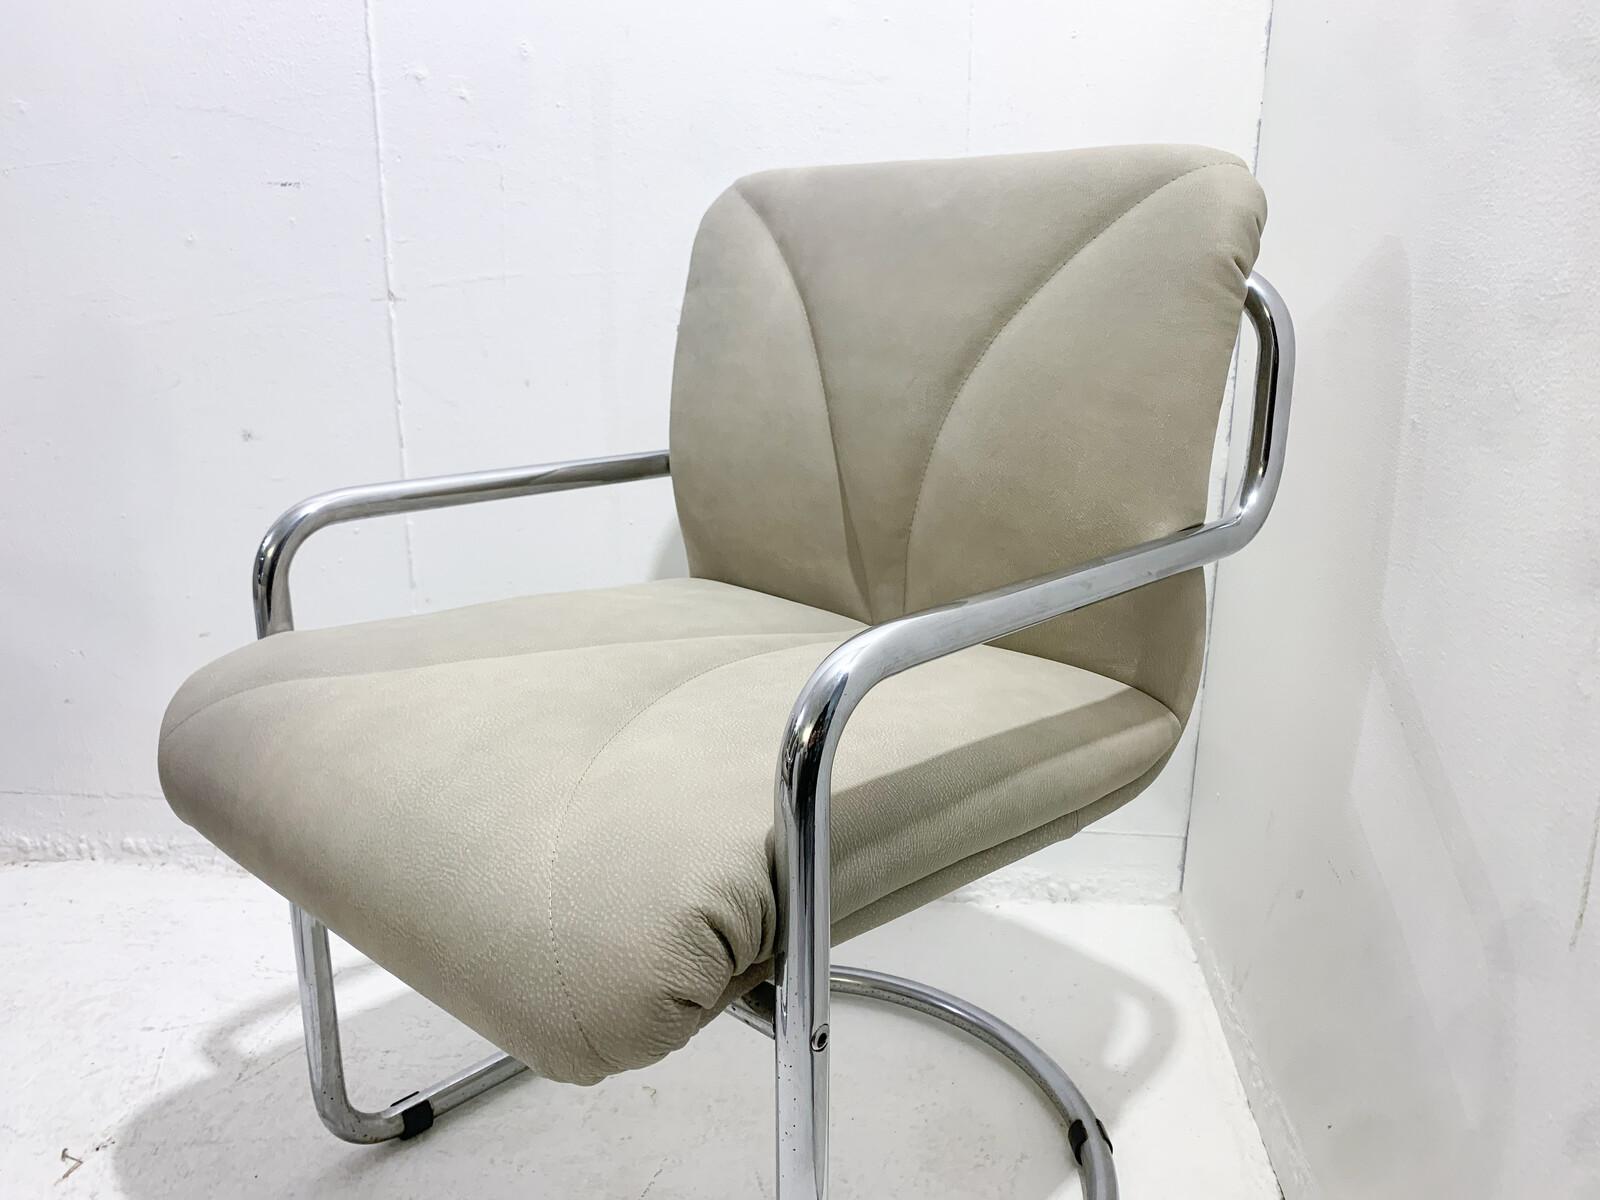 Mid-century set of 4 tubular armchairs by Guido Faleschini - Italy 1970s.